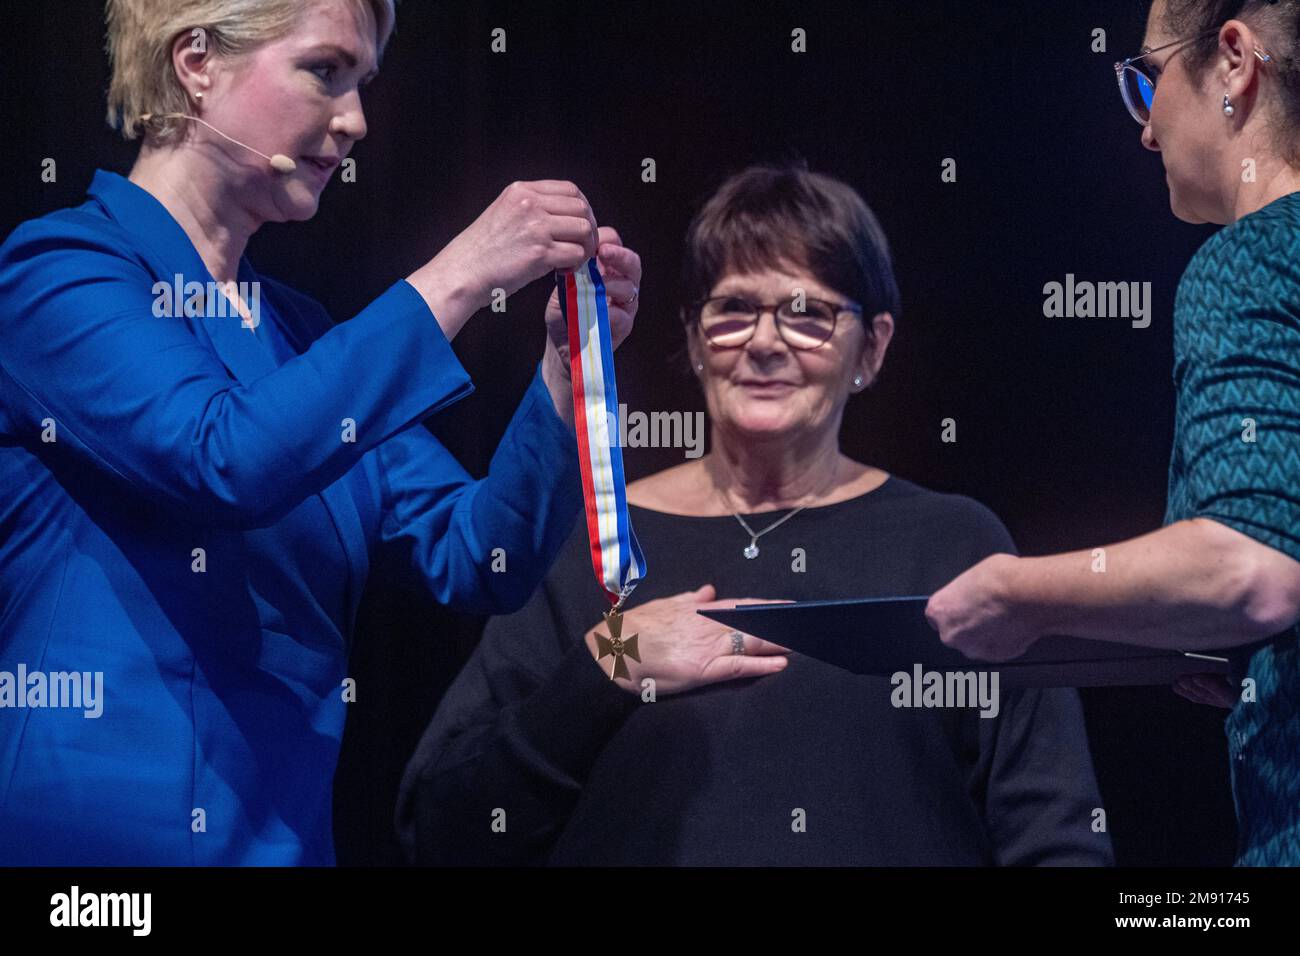 Greifswald, Germany. 16th Jan, 2023. Manuela Schwesig (SPD, l), Minister President of Mecklenburg-Western Pomerania, awards the state's Order of Merit to Sabine Kirton, honorary state chairwoman of the women's cancer self-help group. Sabine Kirton was honored for her commitment to cancer self-help. The Order of Merit was first awarded in 2002 and is the highest honor the state of Mecklenburg-Western Pomerania has to bestow. Credit: Stefan Sauer/dpa/Alamy Live News Stock Photo